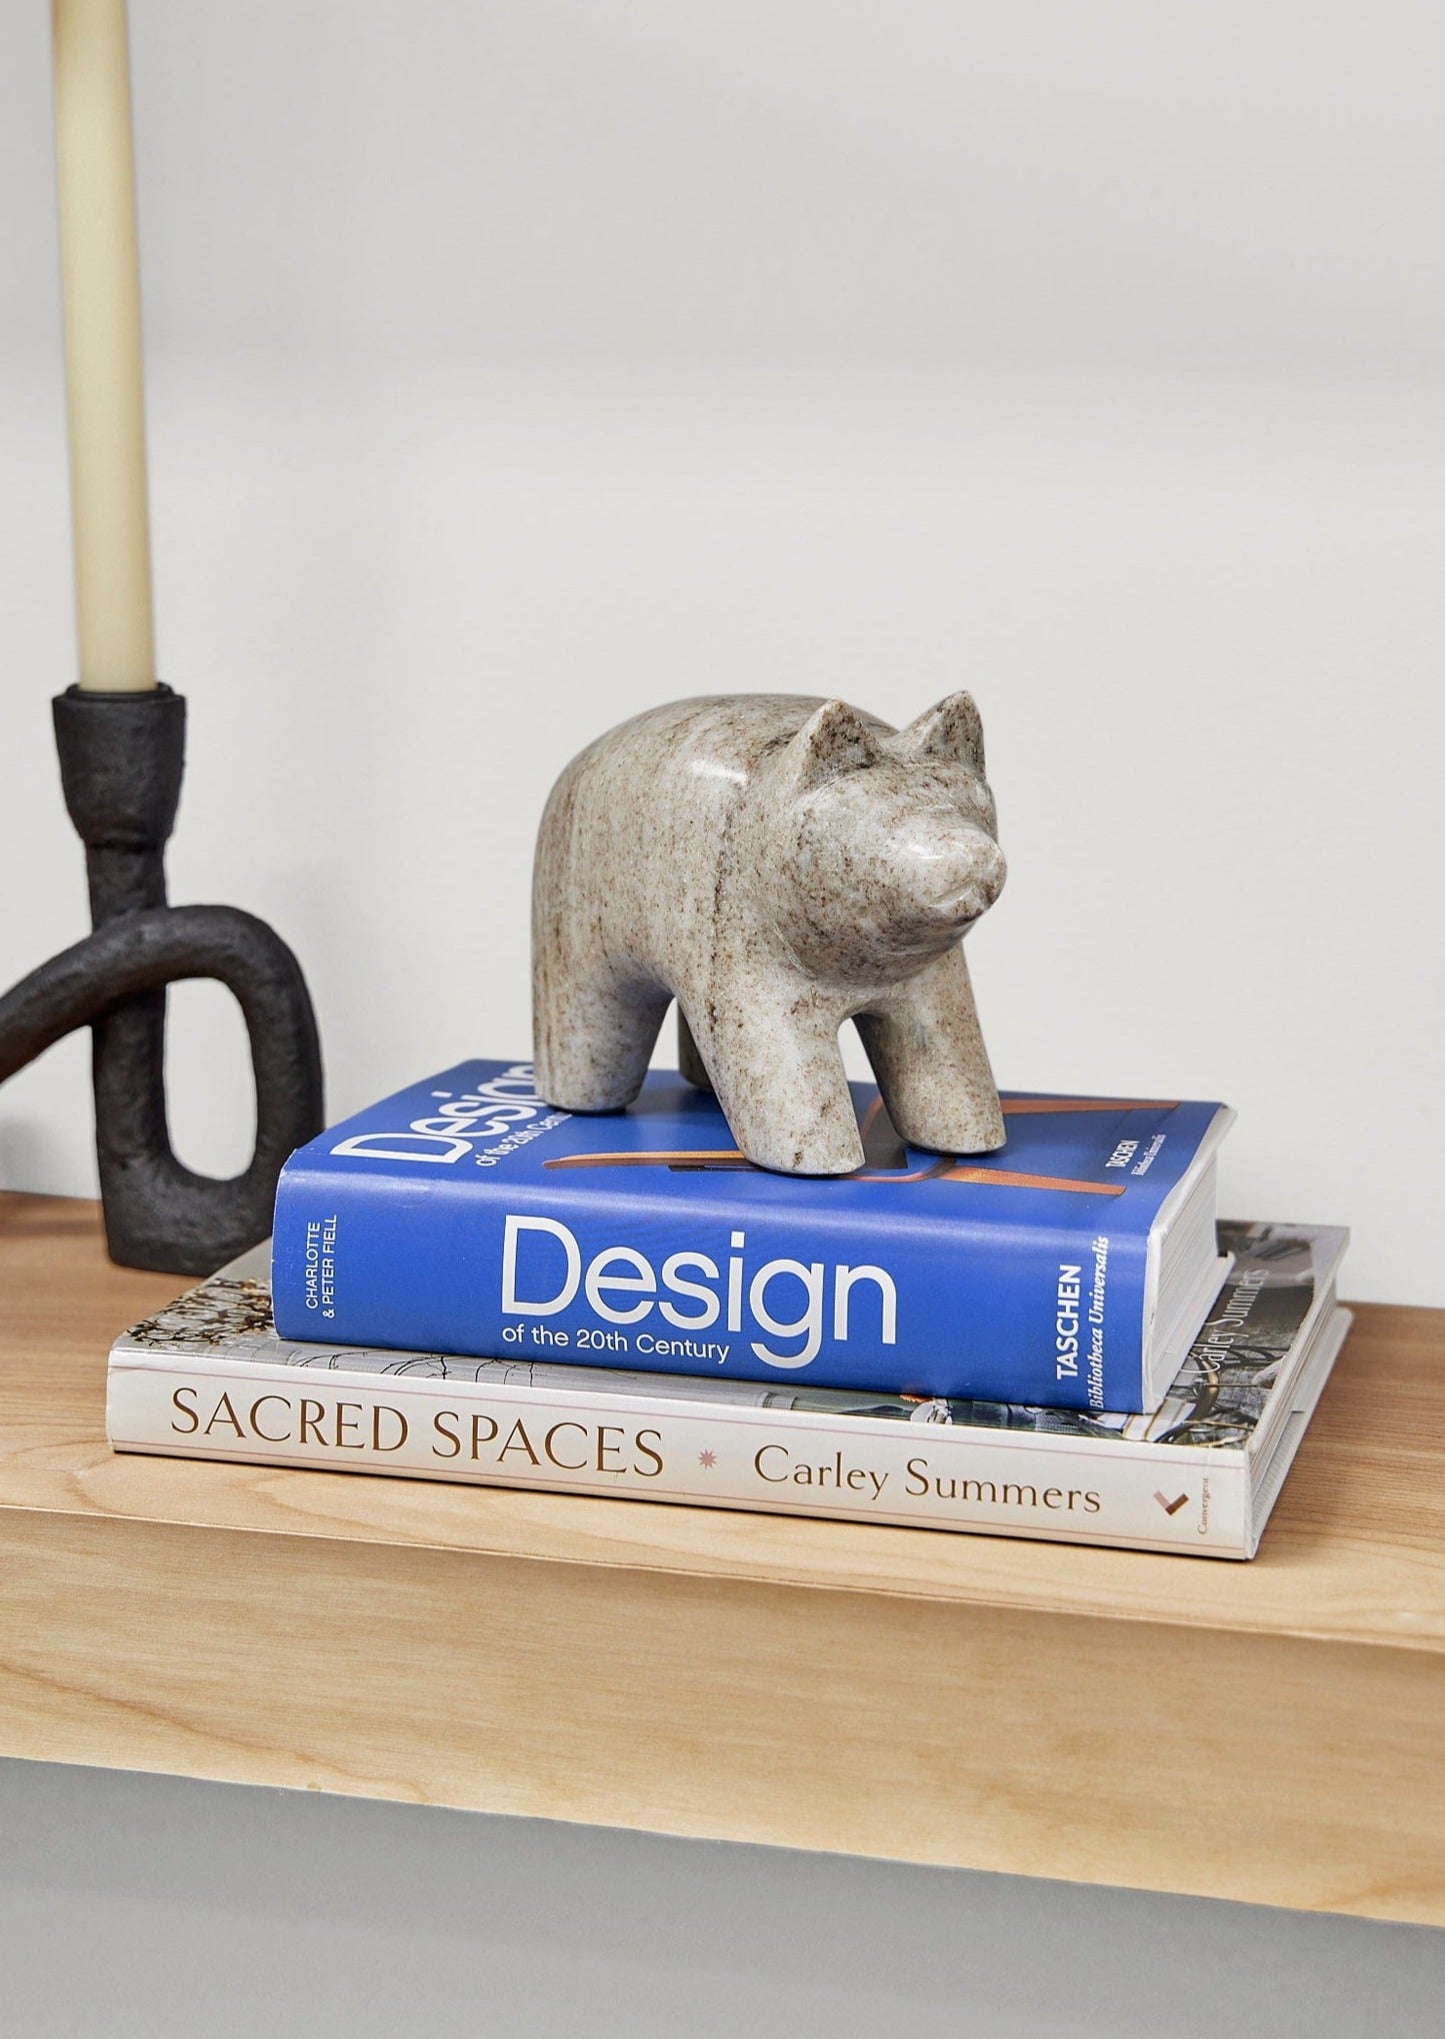 Afloral Home Accessories Marble Bear Paper Weight Styled on Shelf with Books